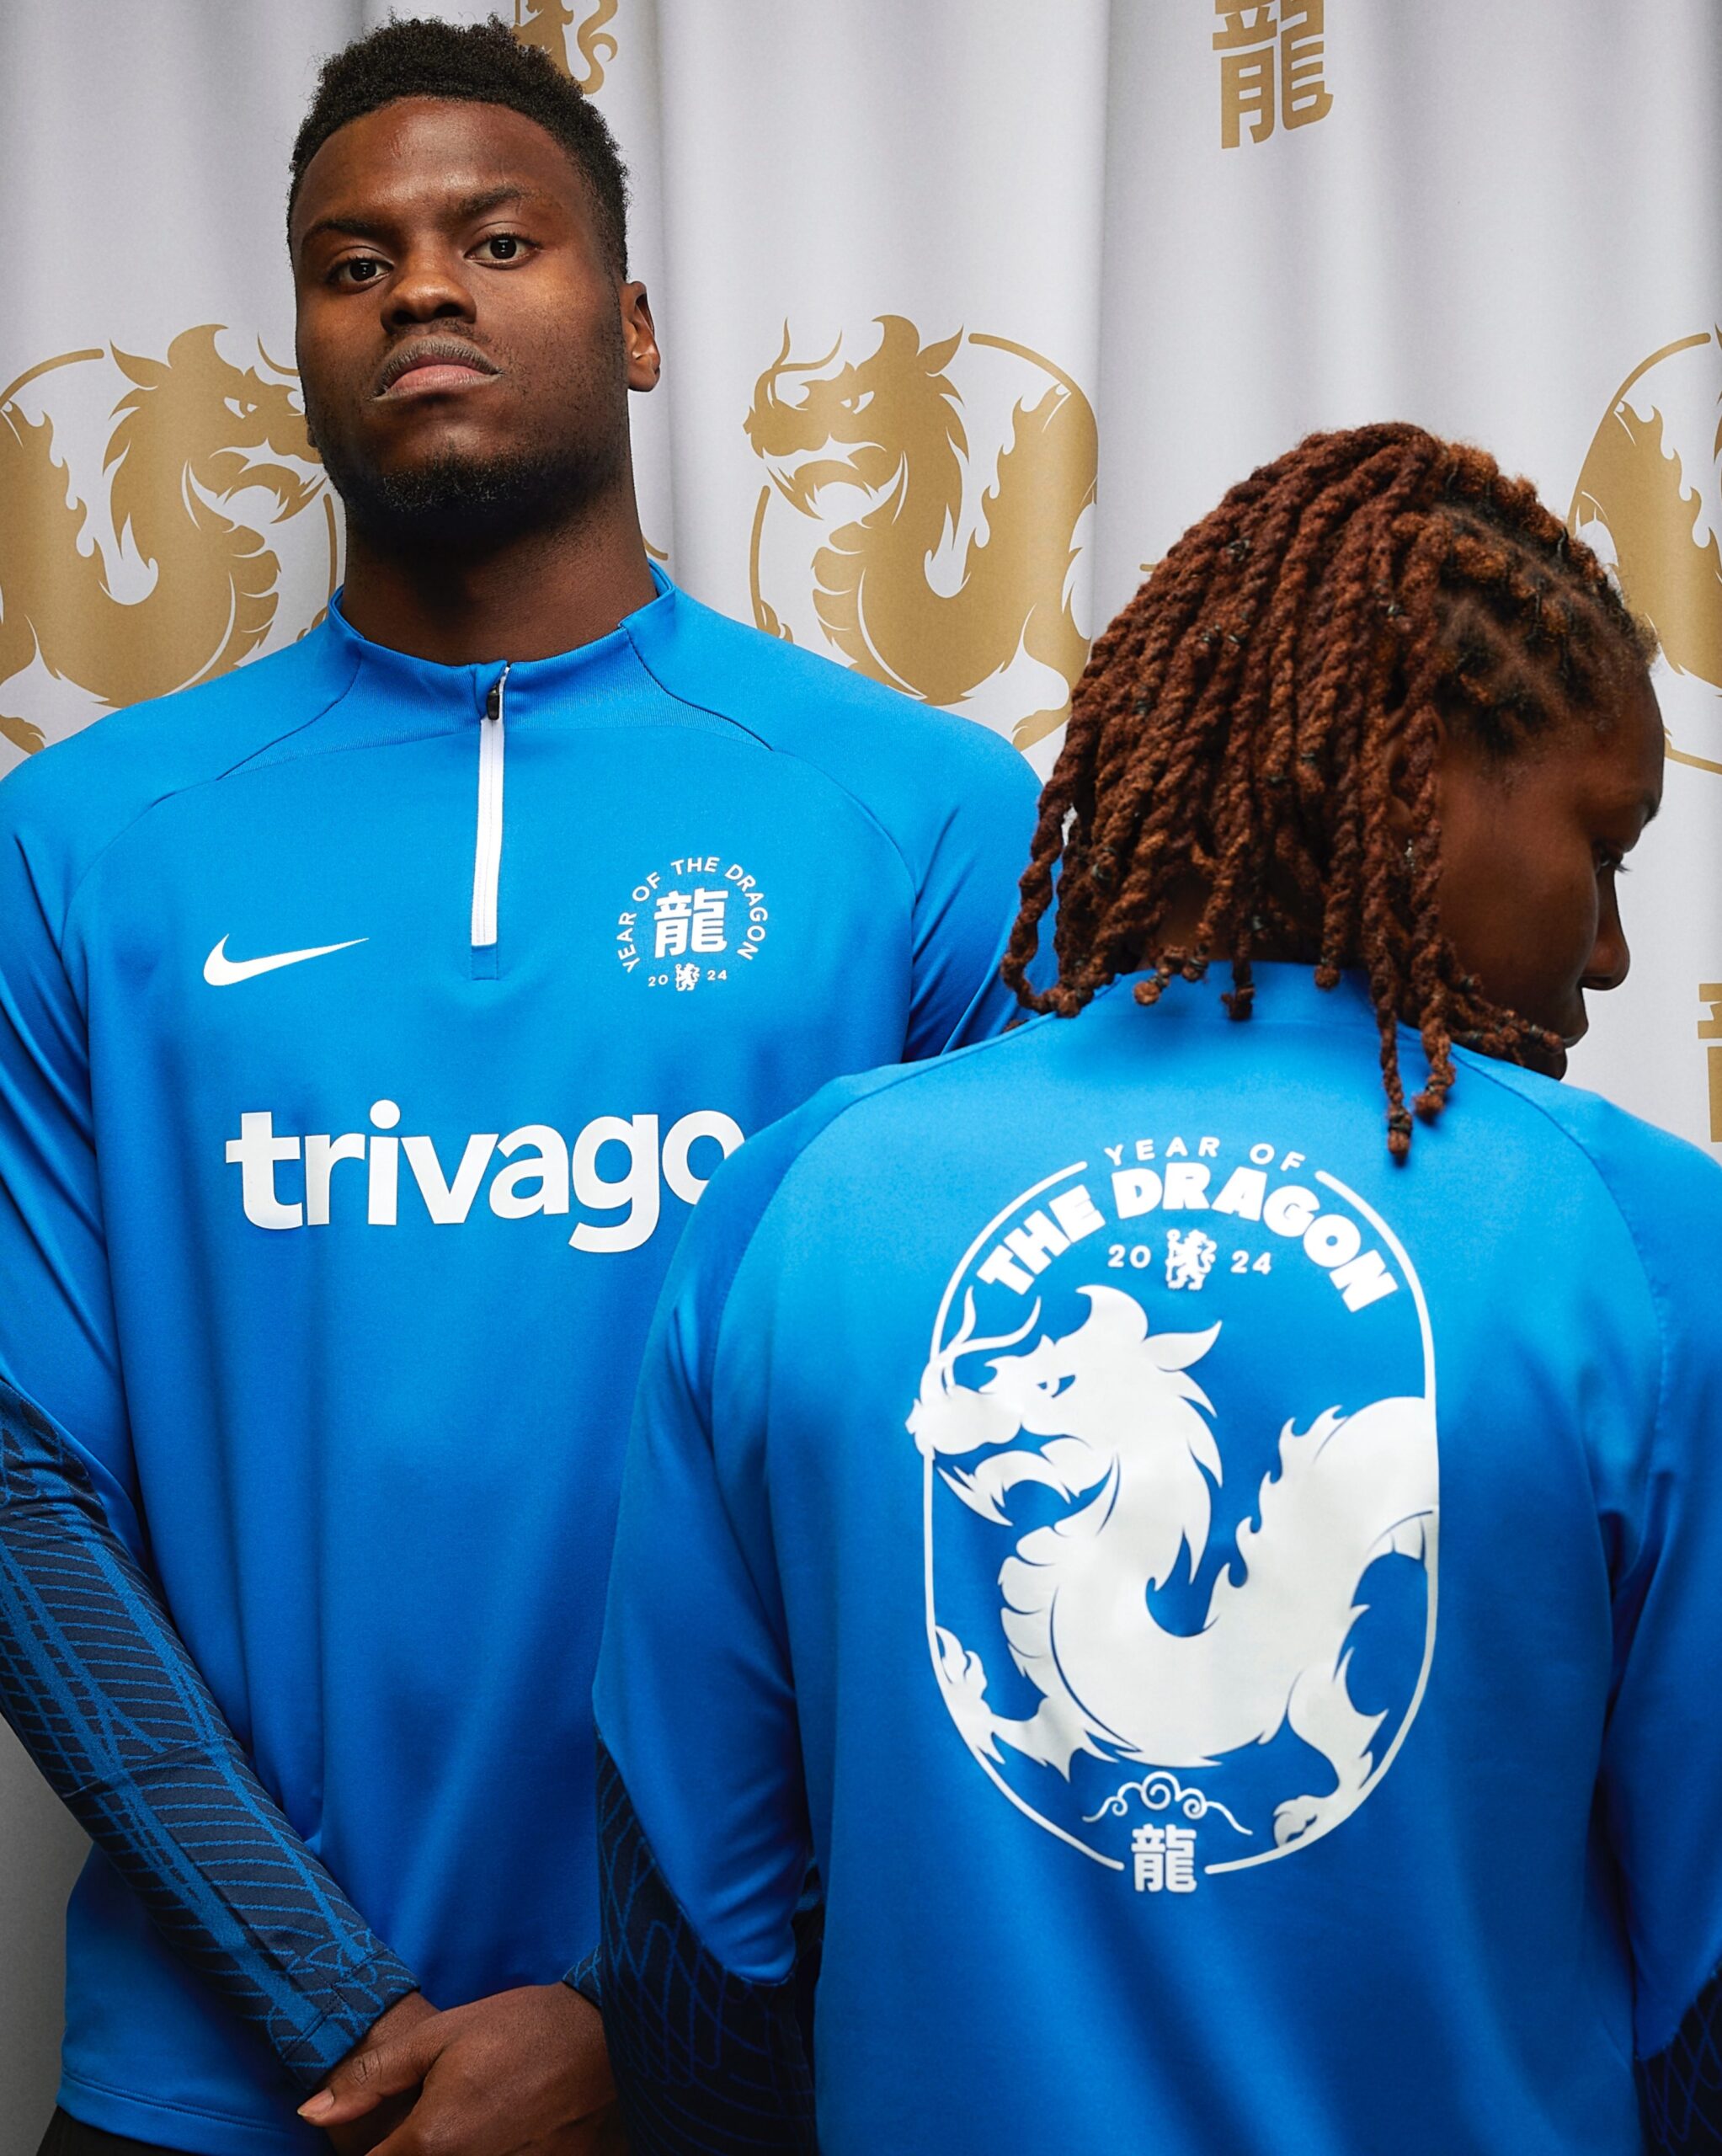 Tapestry-soho-frith-street-production-house-agency-london-chelsea-football-club-mens-womens-jerseys-photography-retouching-location-lunar-new-year-chinese-asian-culture-dragon-zodiac-complete-services-stamford-bridge-campaigns-getintouch-good-fortune-power-confidence-the-blues-chelseafc